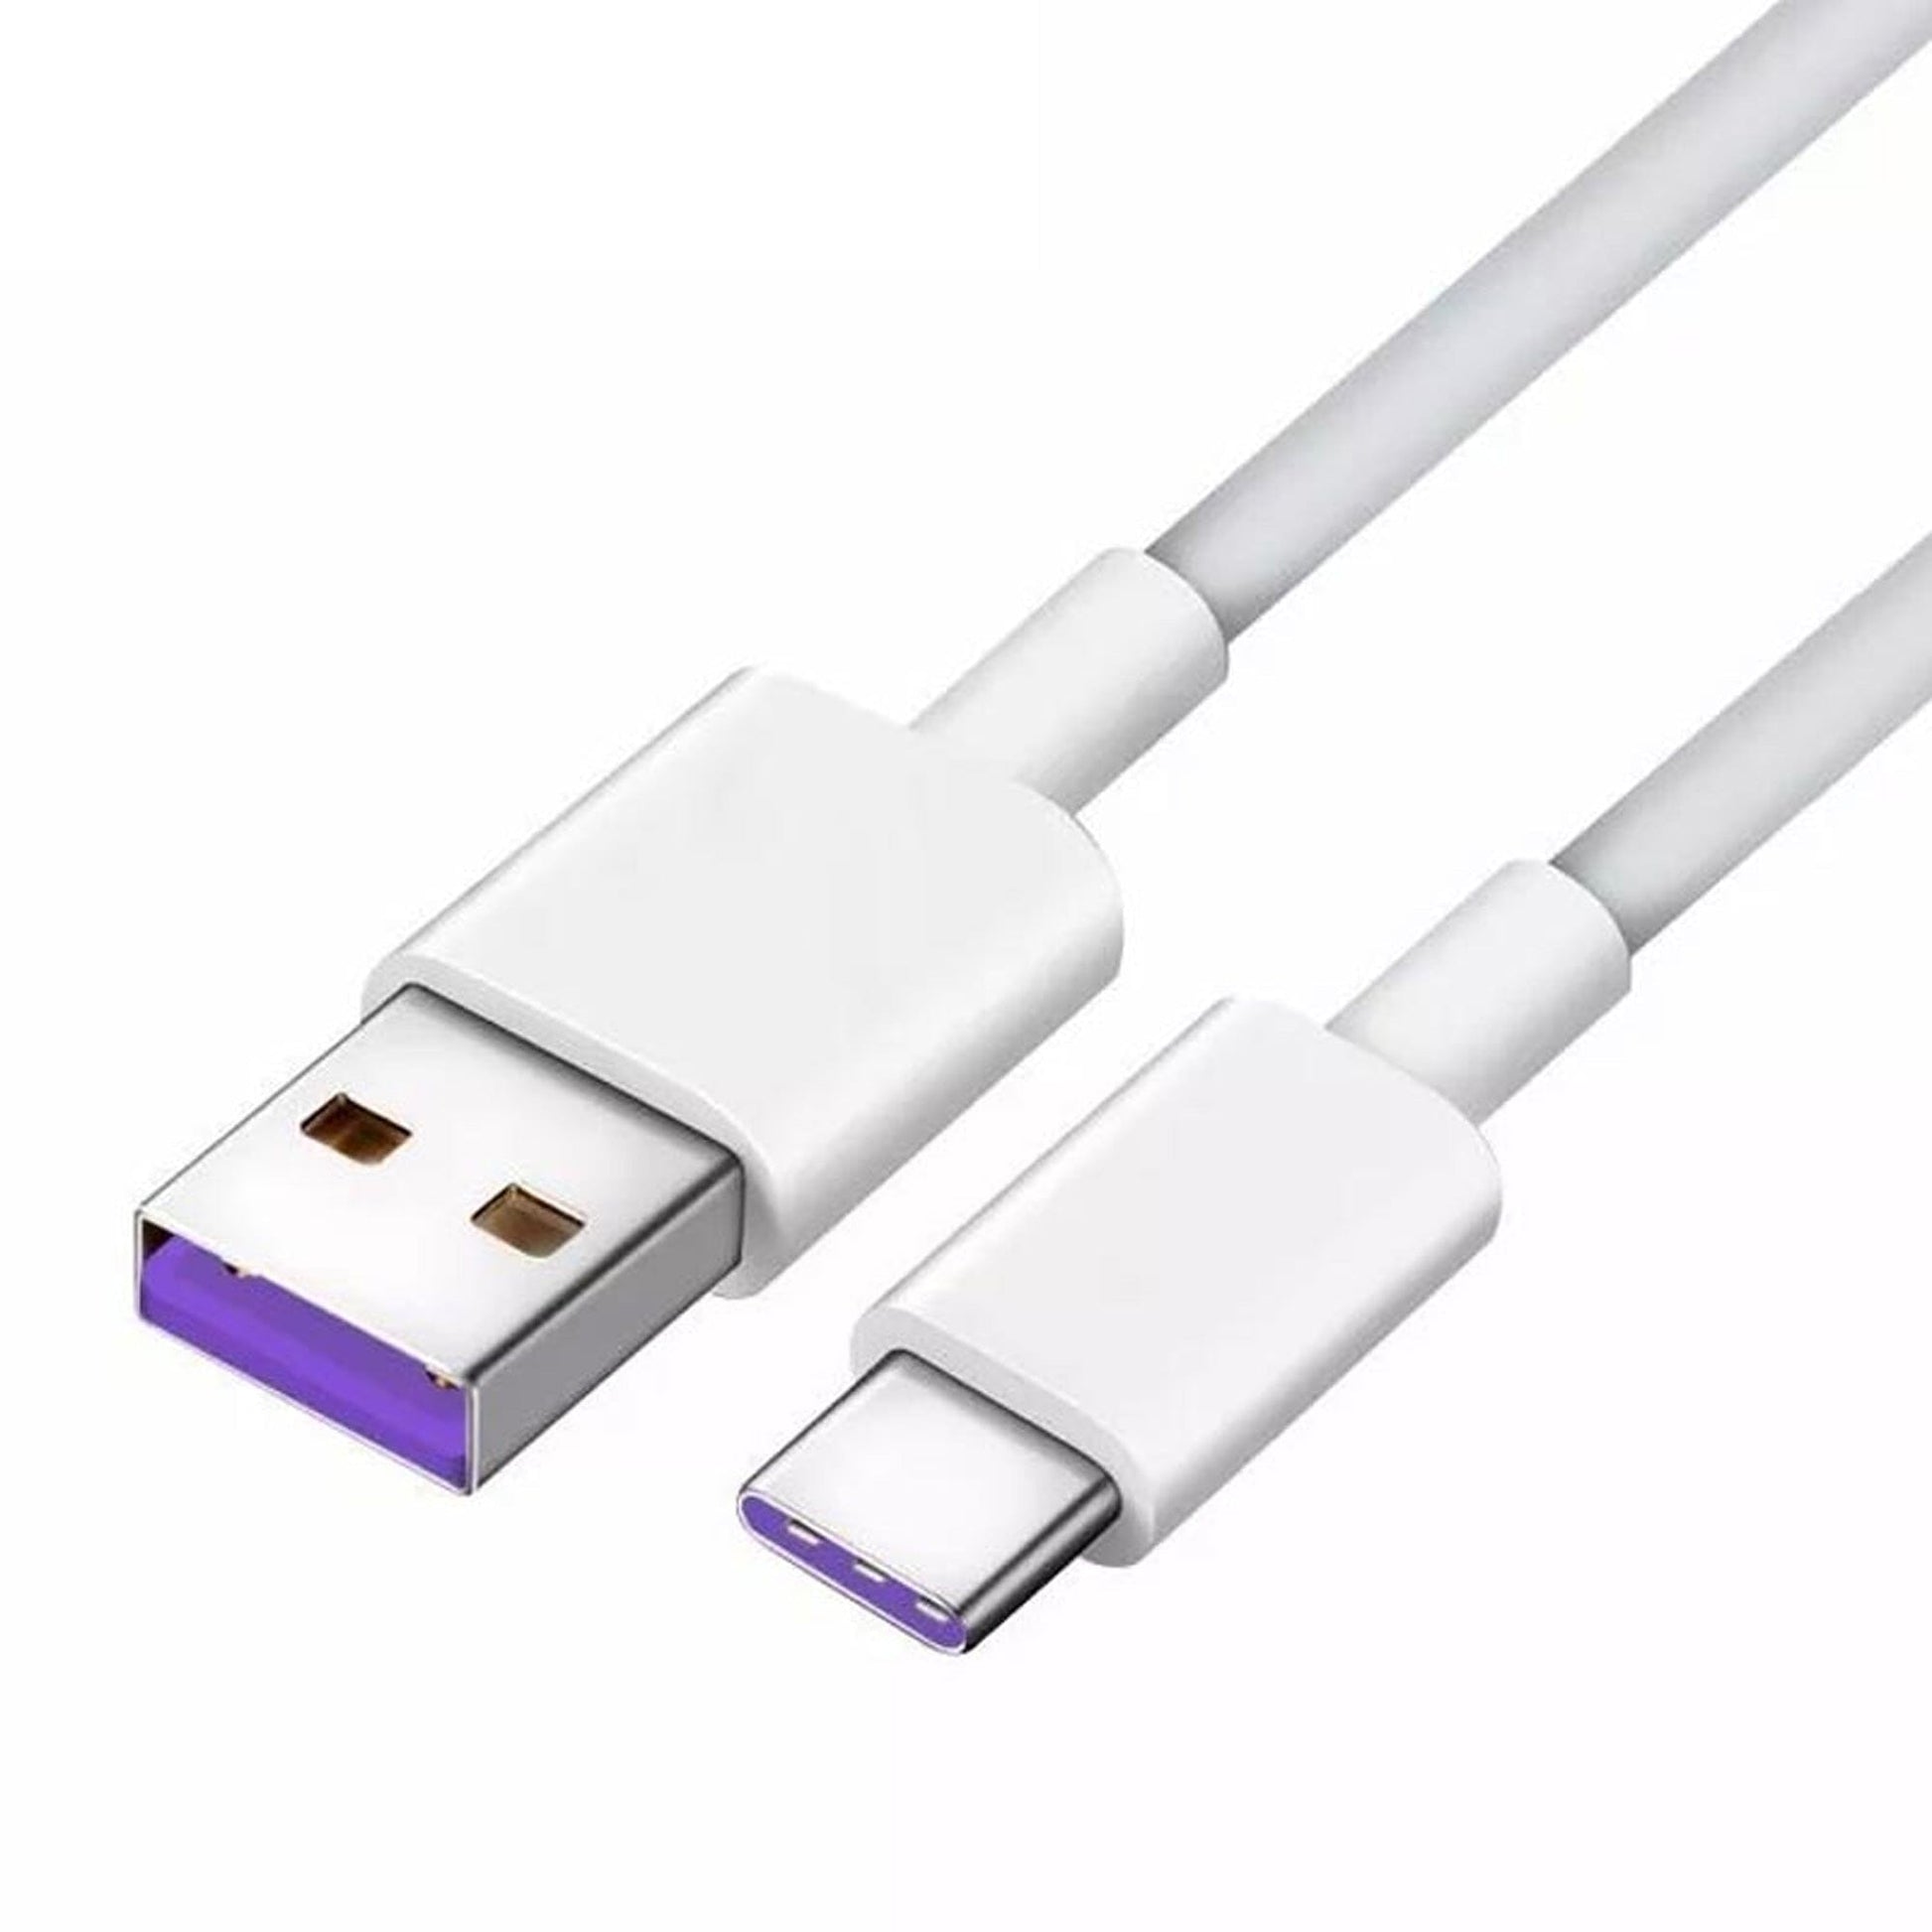 Hagen Android Fast Charging USB Type-C Cable Mobile Accessories SDQ 